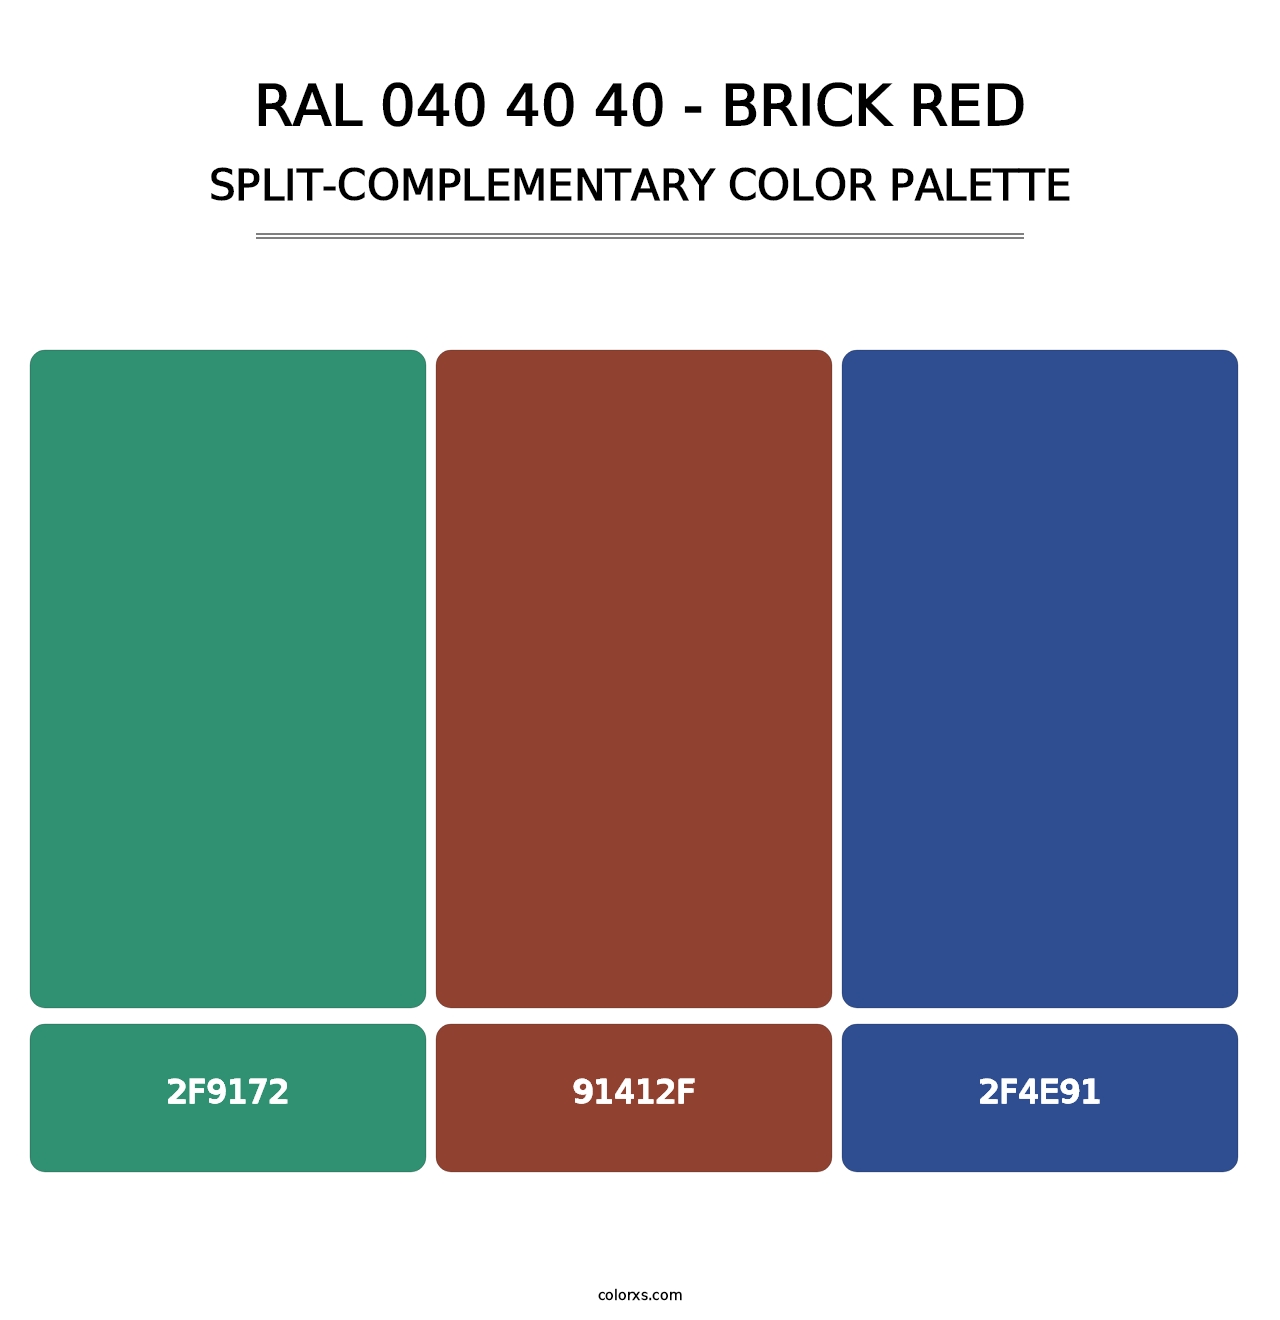 RAL 040 40 40 - Brick Red - Split-Complementary Color Palette